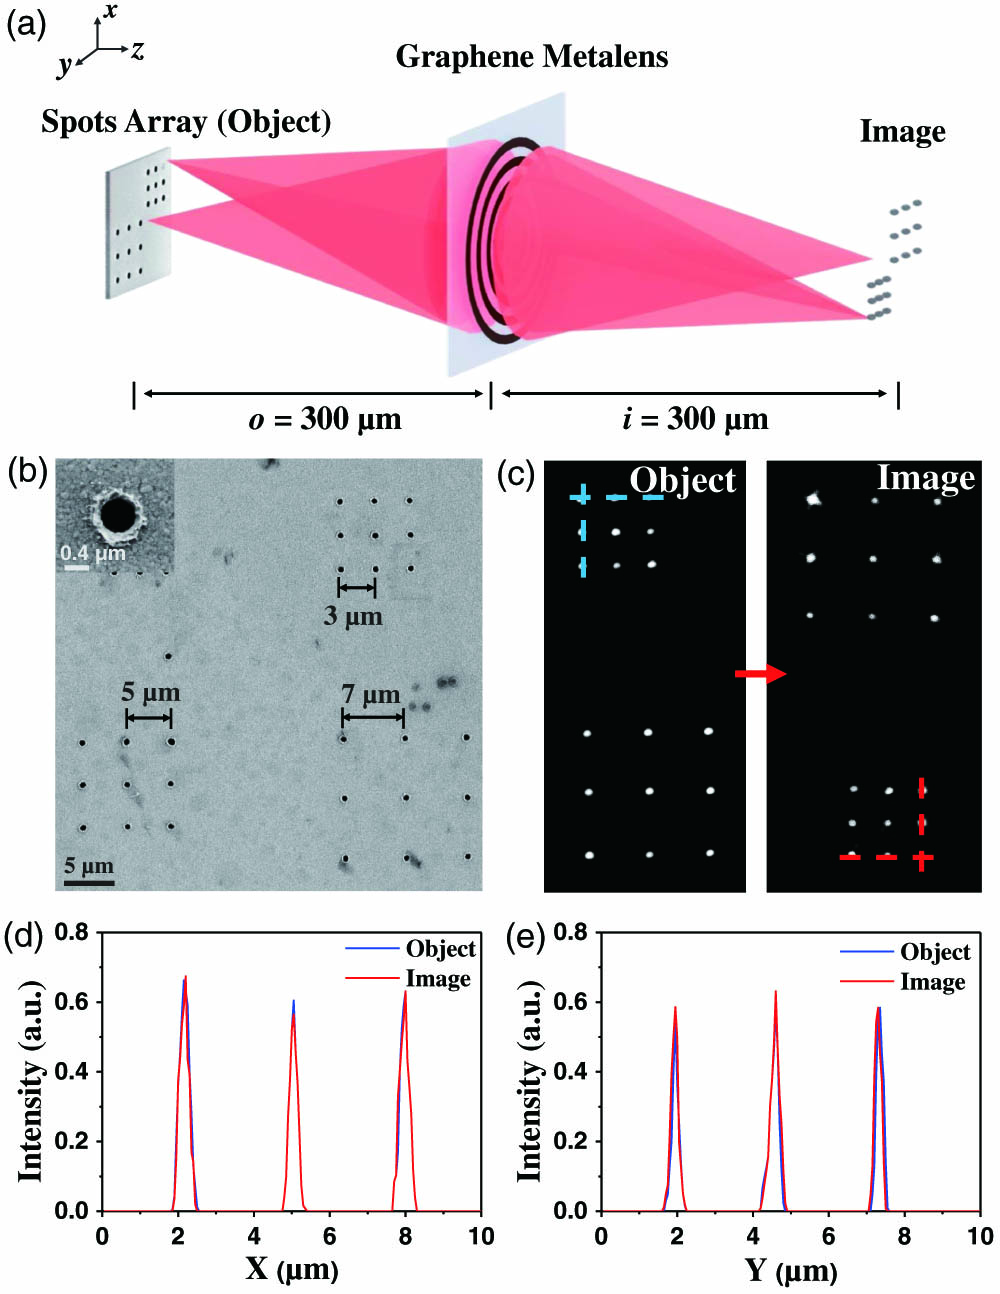 Imaging performance of the graphene metalens. (a) Schematic of imaging experiment of the spot array object imaged by the graphene metalens. (b) SEM image of the spot array object; (c) optical image of the object and image from the graphene metalens; cross-sectional intensity distribution along the (d) horizontal lines and (e) vertical lines of the spots array from the sample and image. Scale bars in (b) and (c) are 5 μm. Scale bar in the inset of (b) is 0.4 μm.